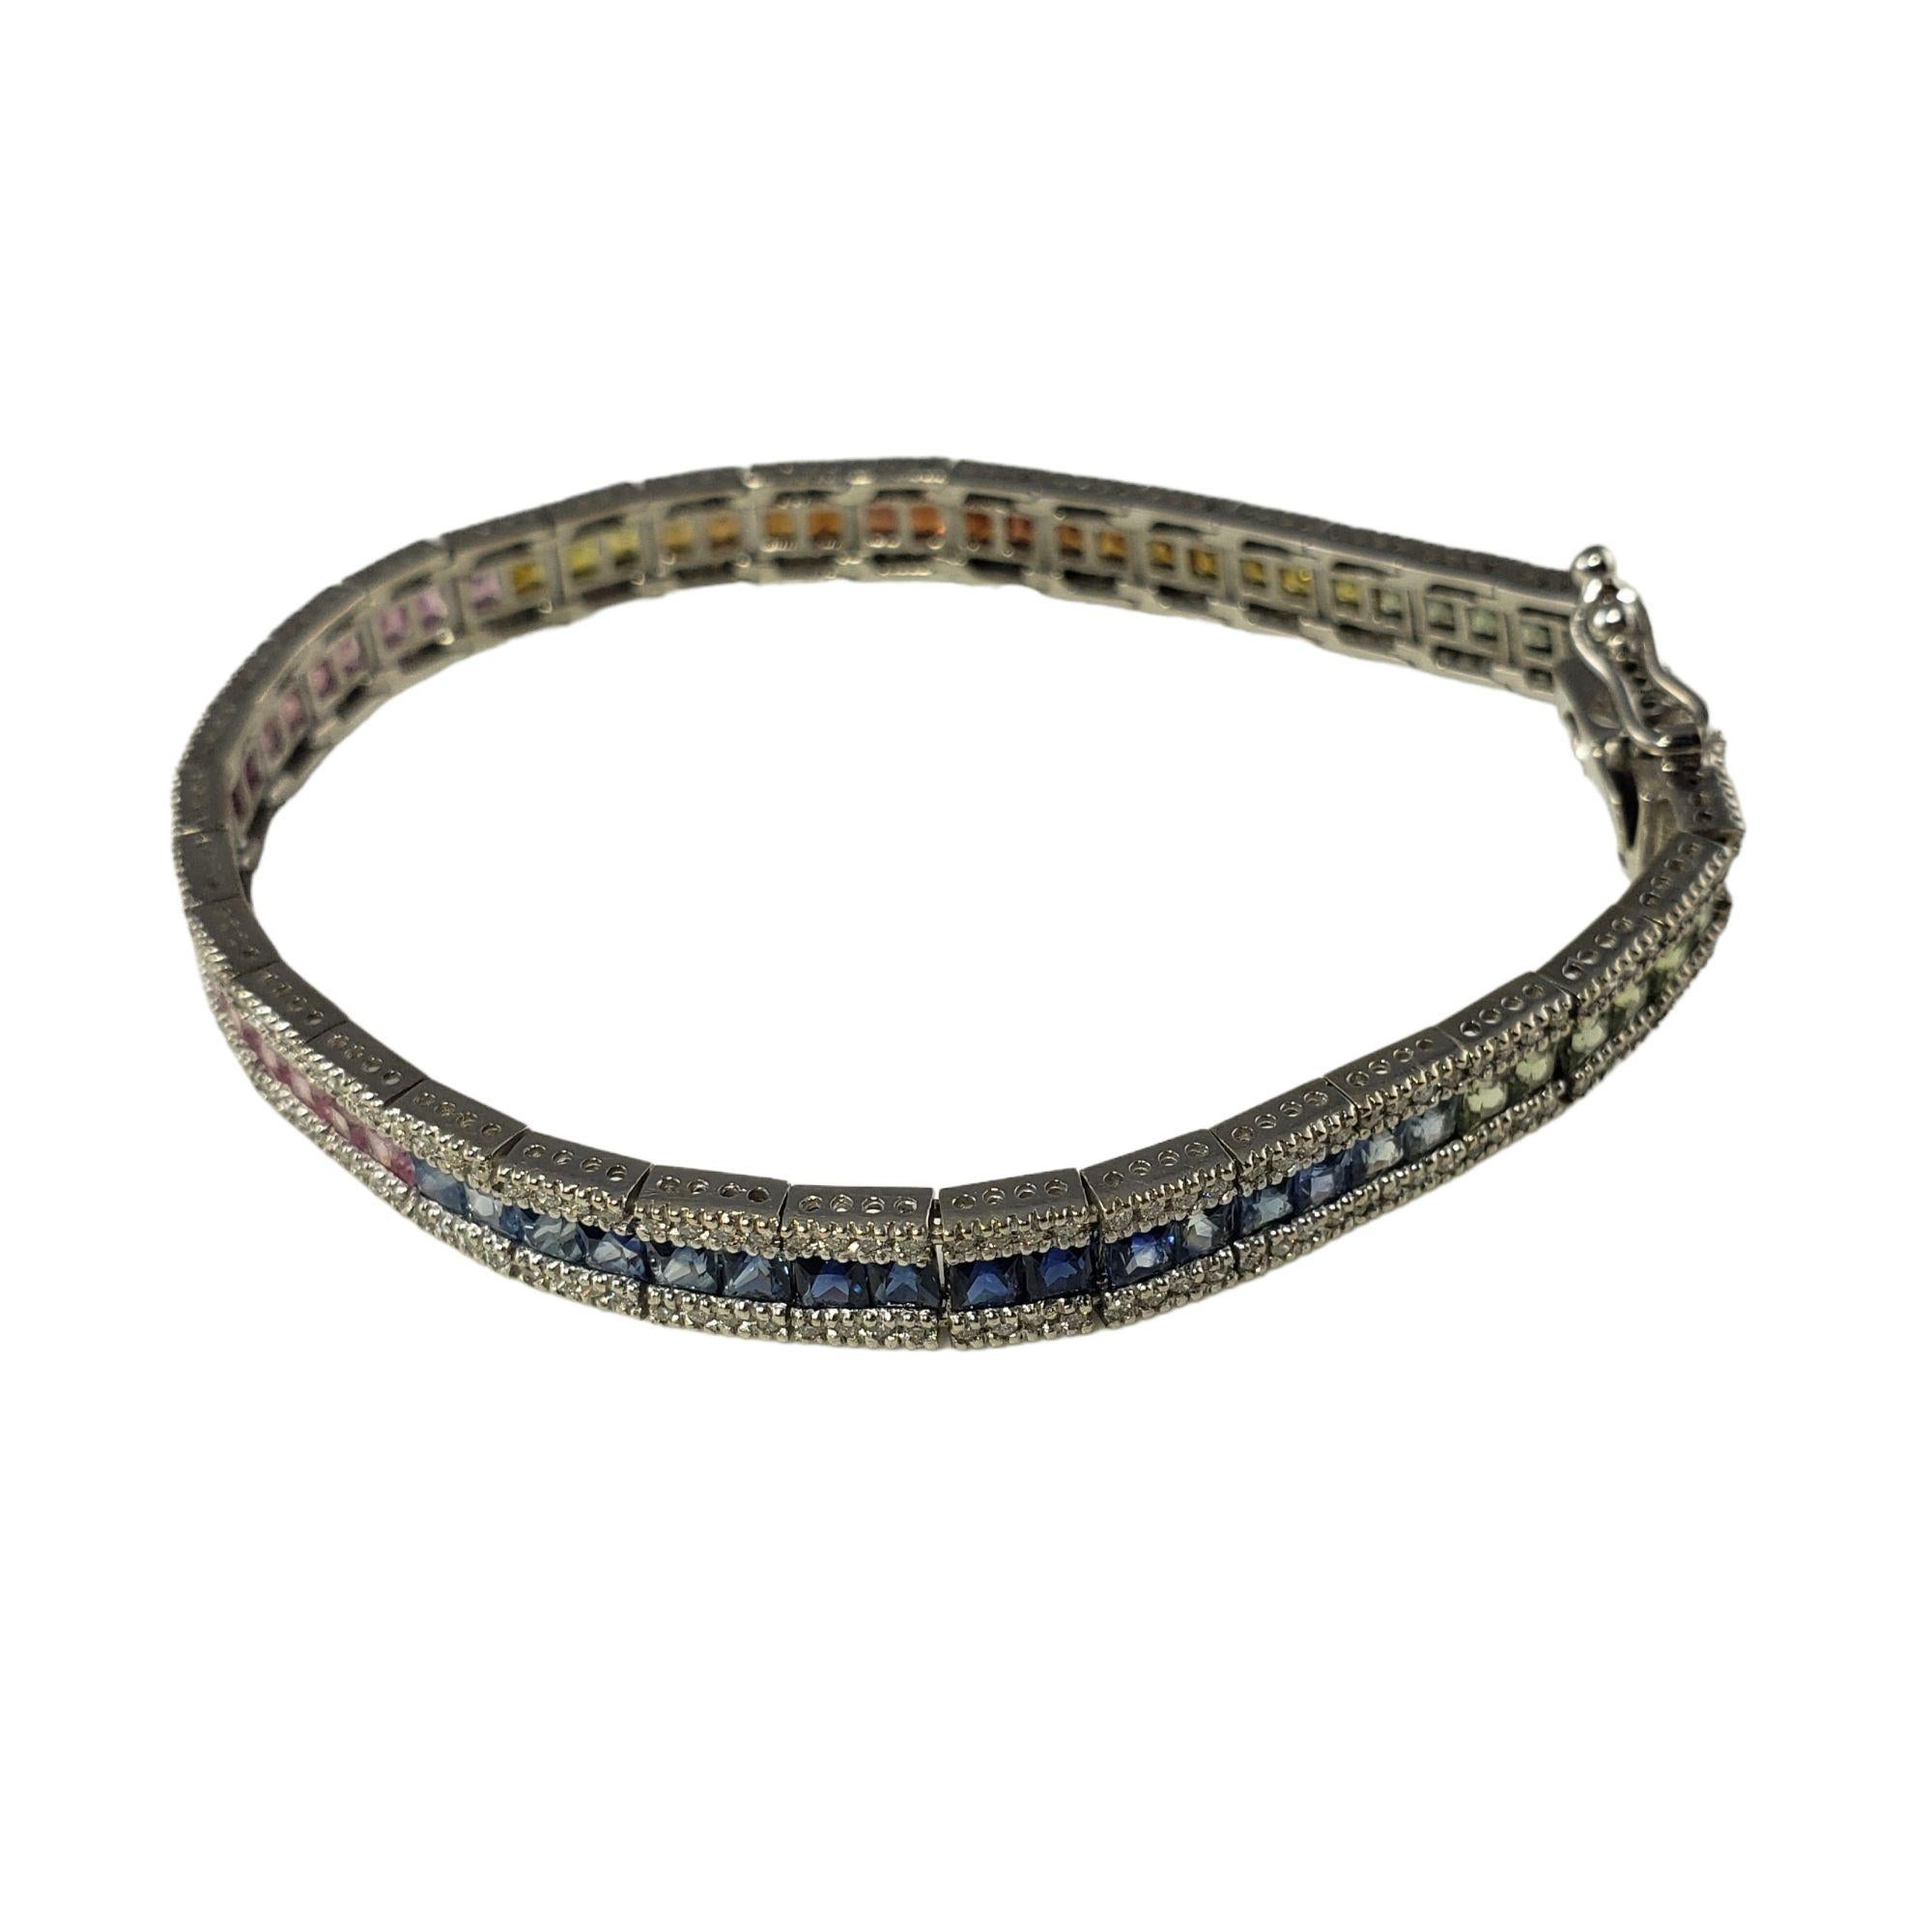 14 Karat White Gold Diamond and Sapphire Rainbow Style Bracelet #15240 In Good Condition For Sale In Washington Depot, CT